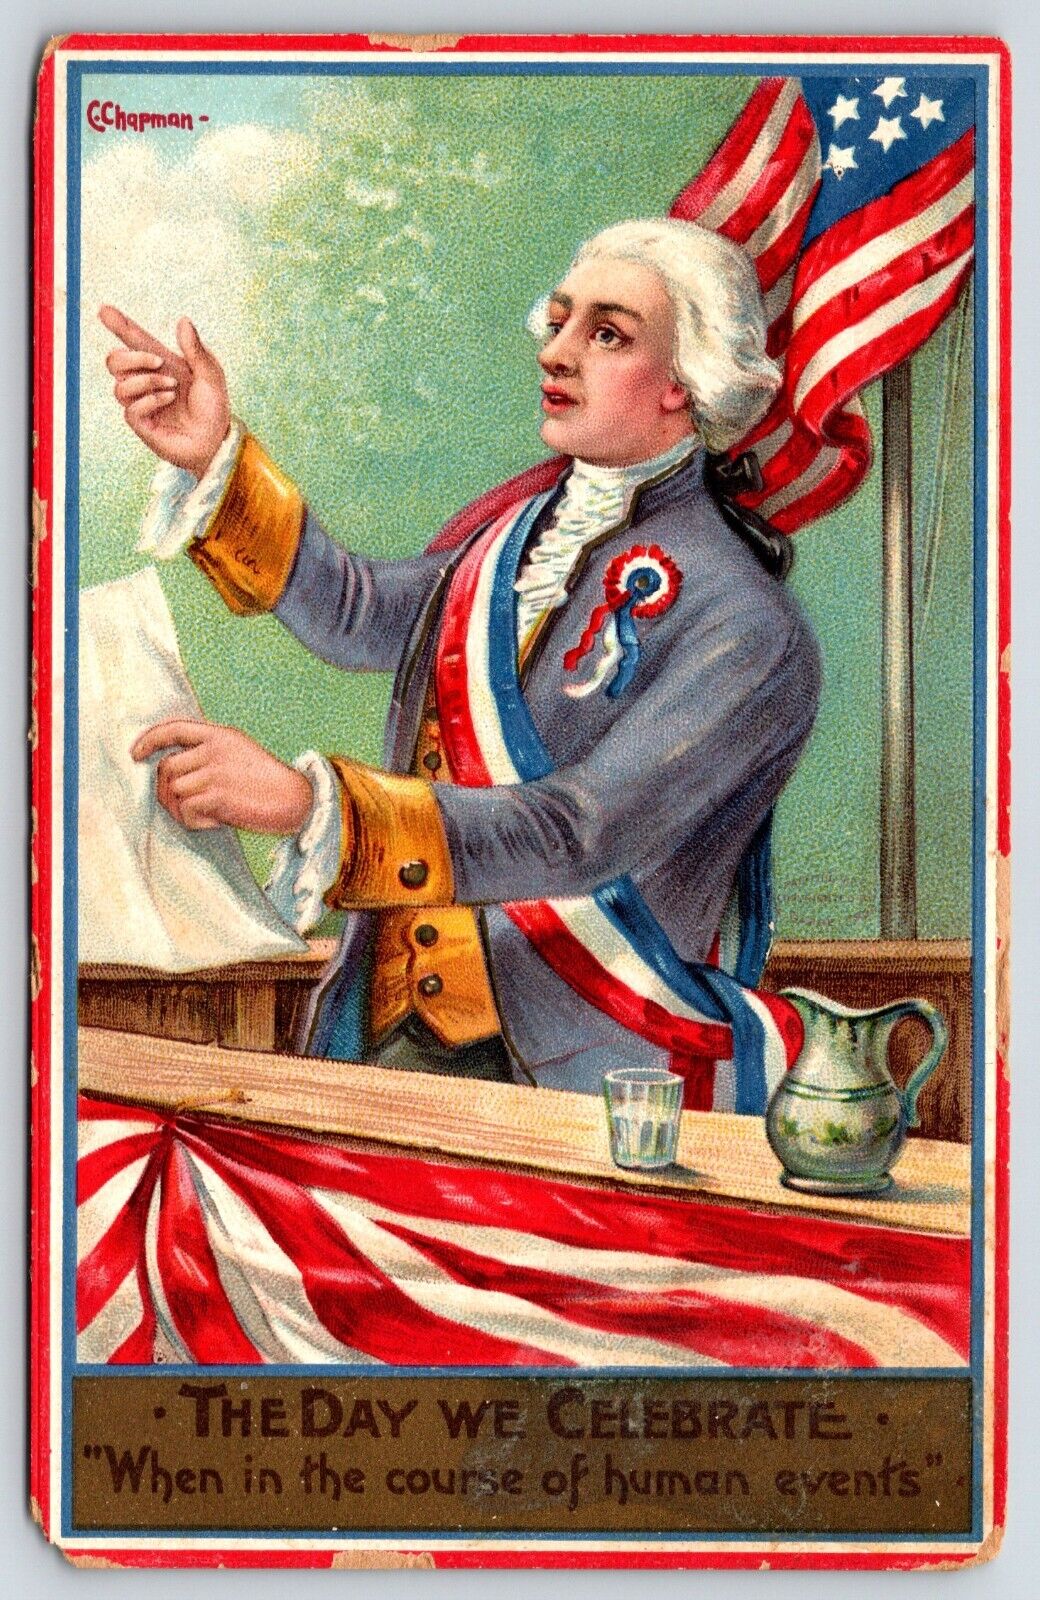 Postcard Fourth Of July Patriotic The Day We Celebrate A/S C. CHAPMAN